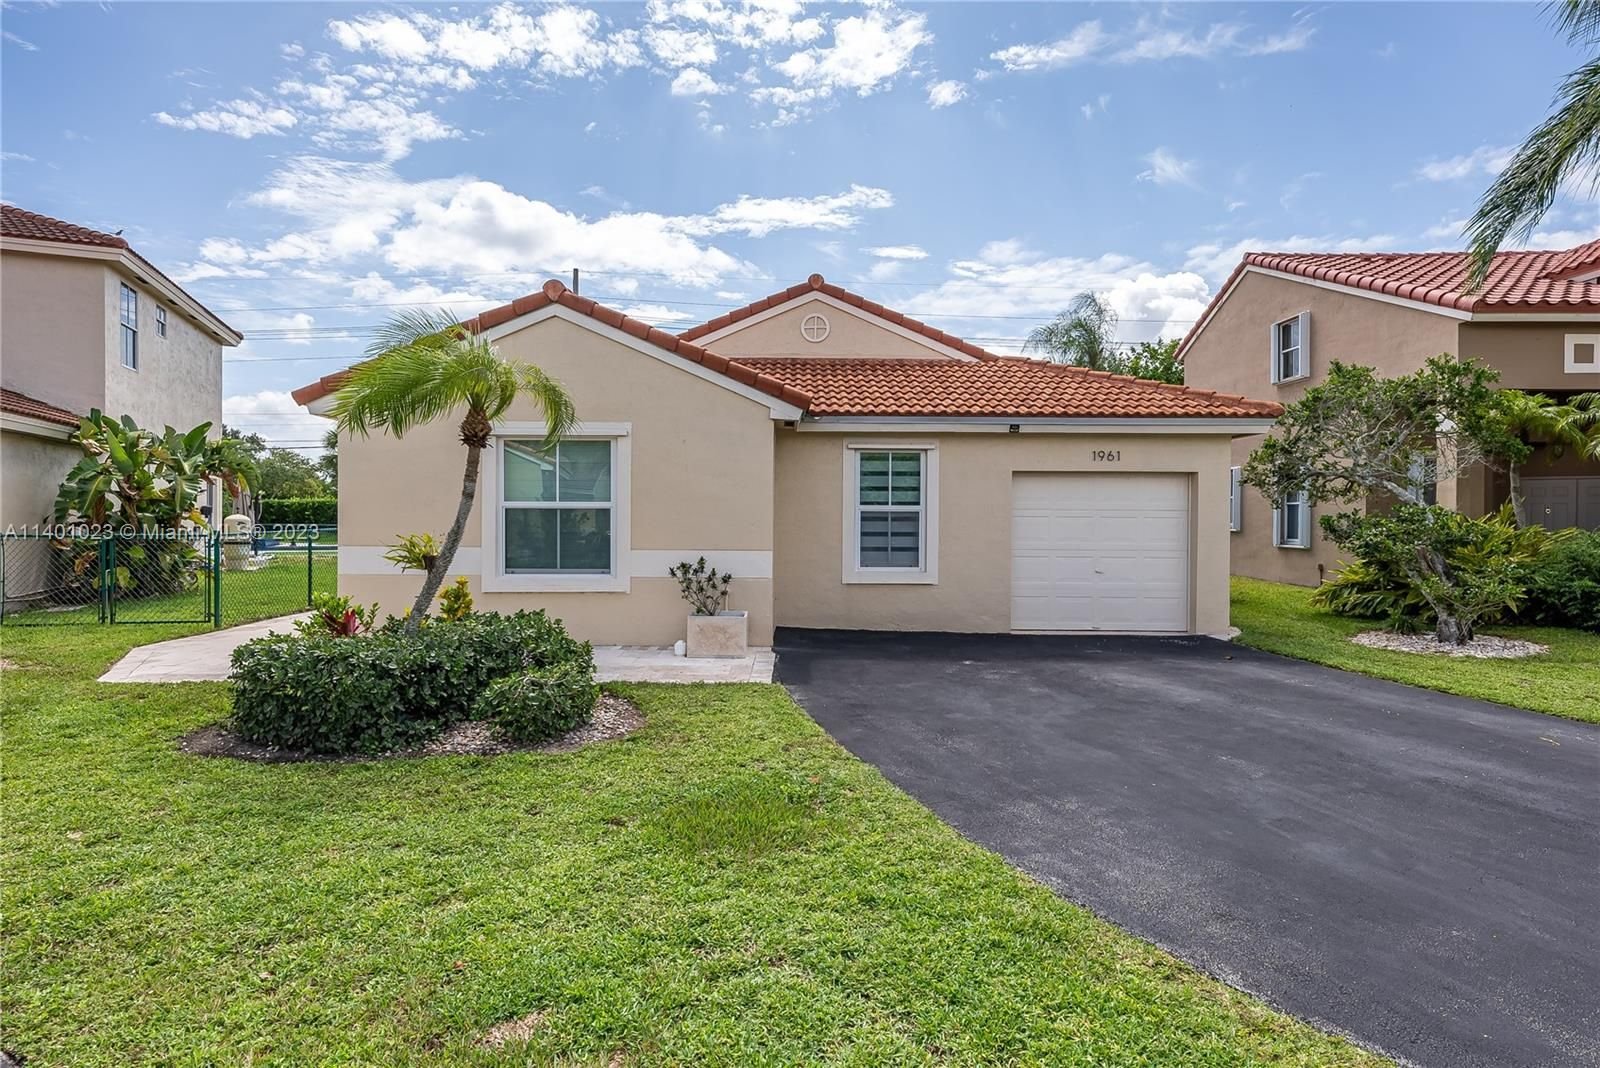 Real estate property located at 1961 184th Ter, Broward County, Pembroke Pines, FL